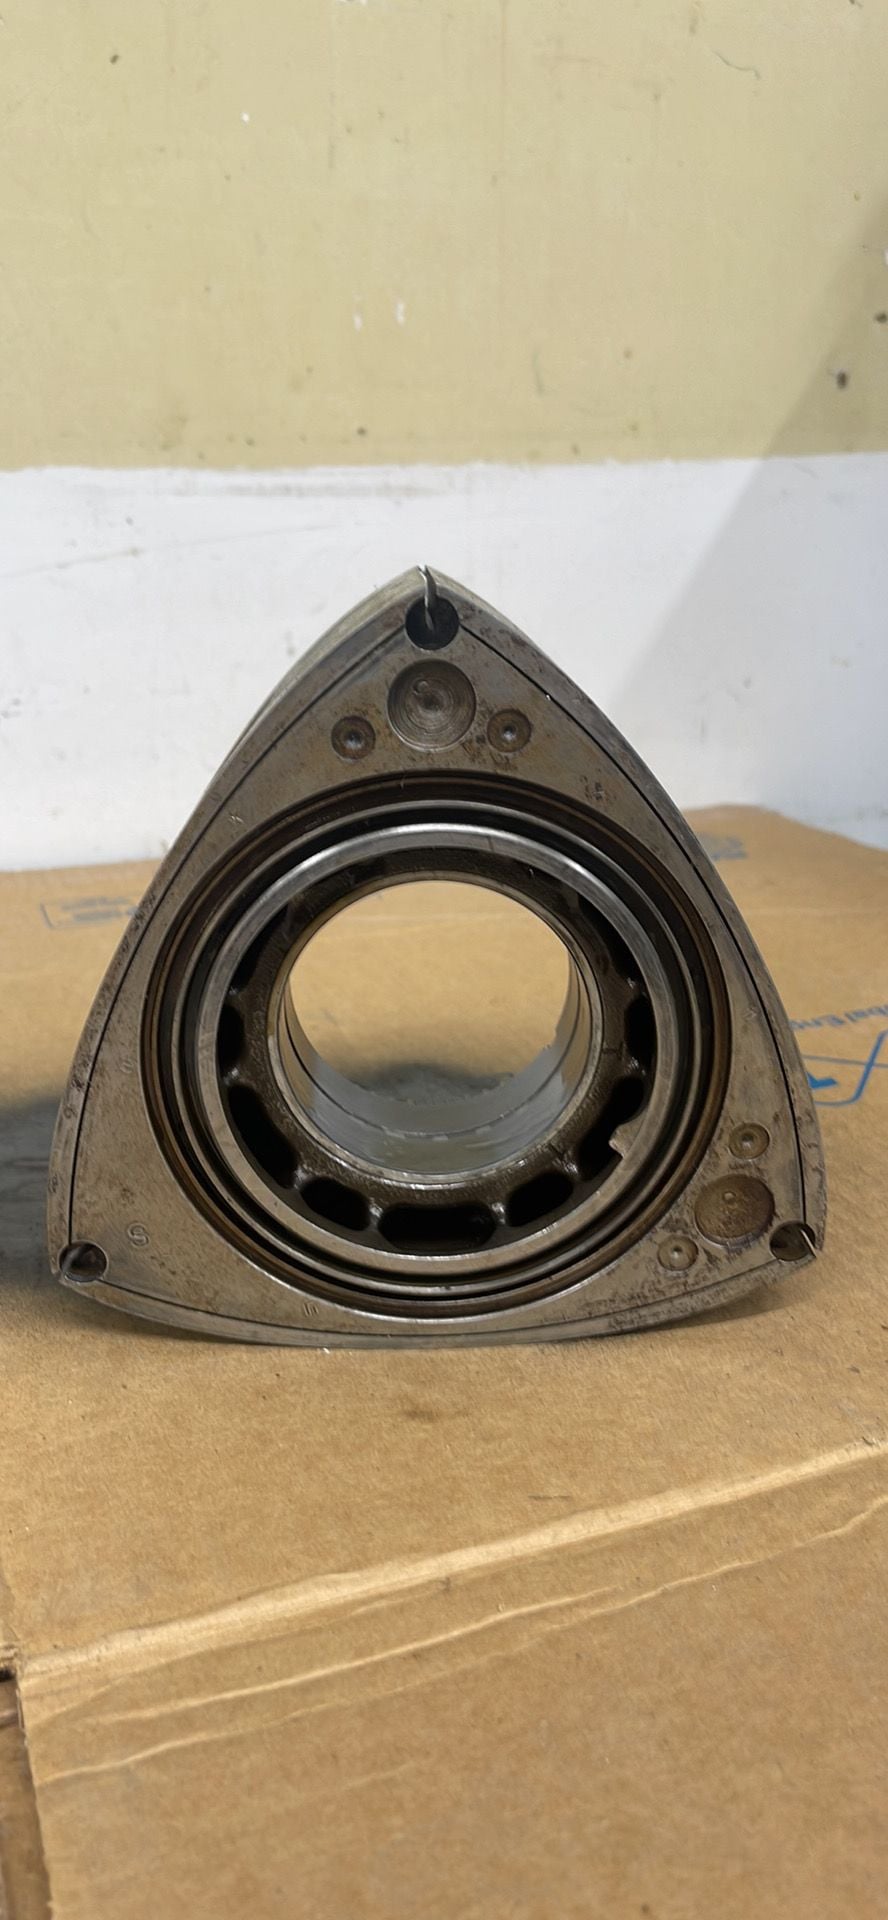 Engine - Internals - 13b Rew rotor housings and One rotor PARTING - Used - Saint Anne, IL 60964, United States